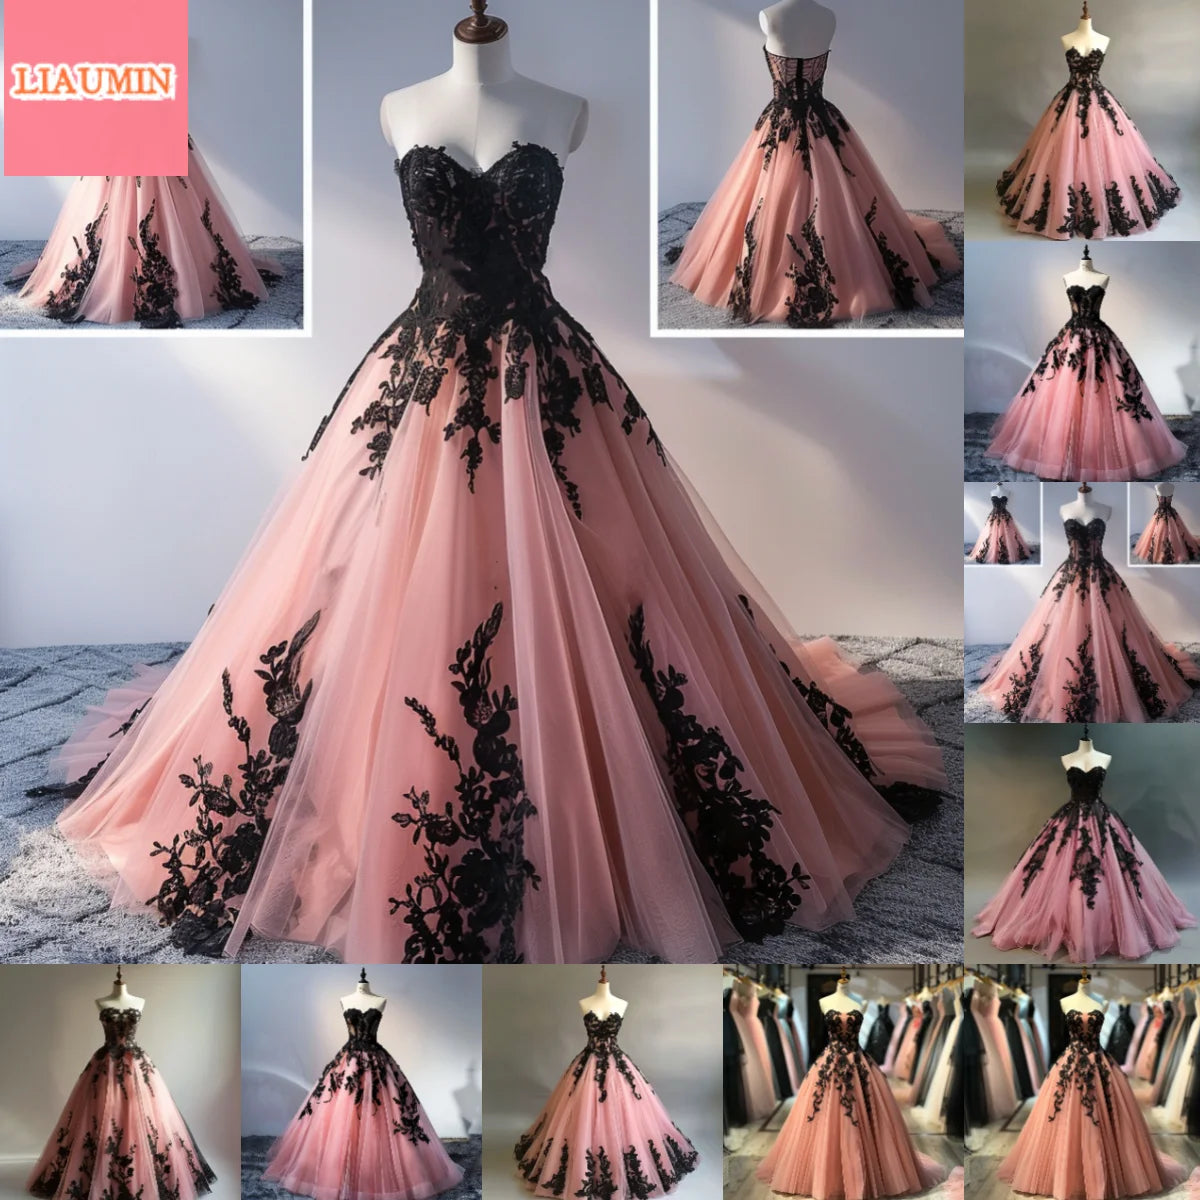 Pink Tulle And Black Applique Strapless Full Length Lace Up Back Formal Prom Evening Dress Brithday Homecoming Clothing  W9-10